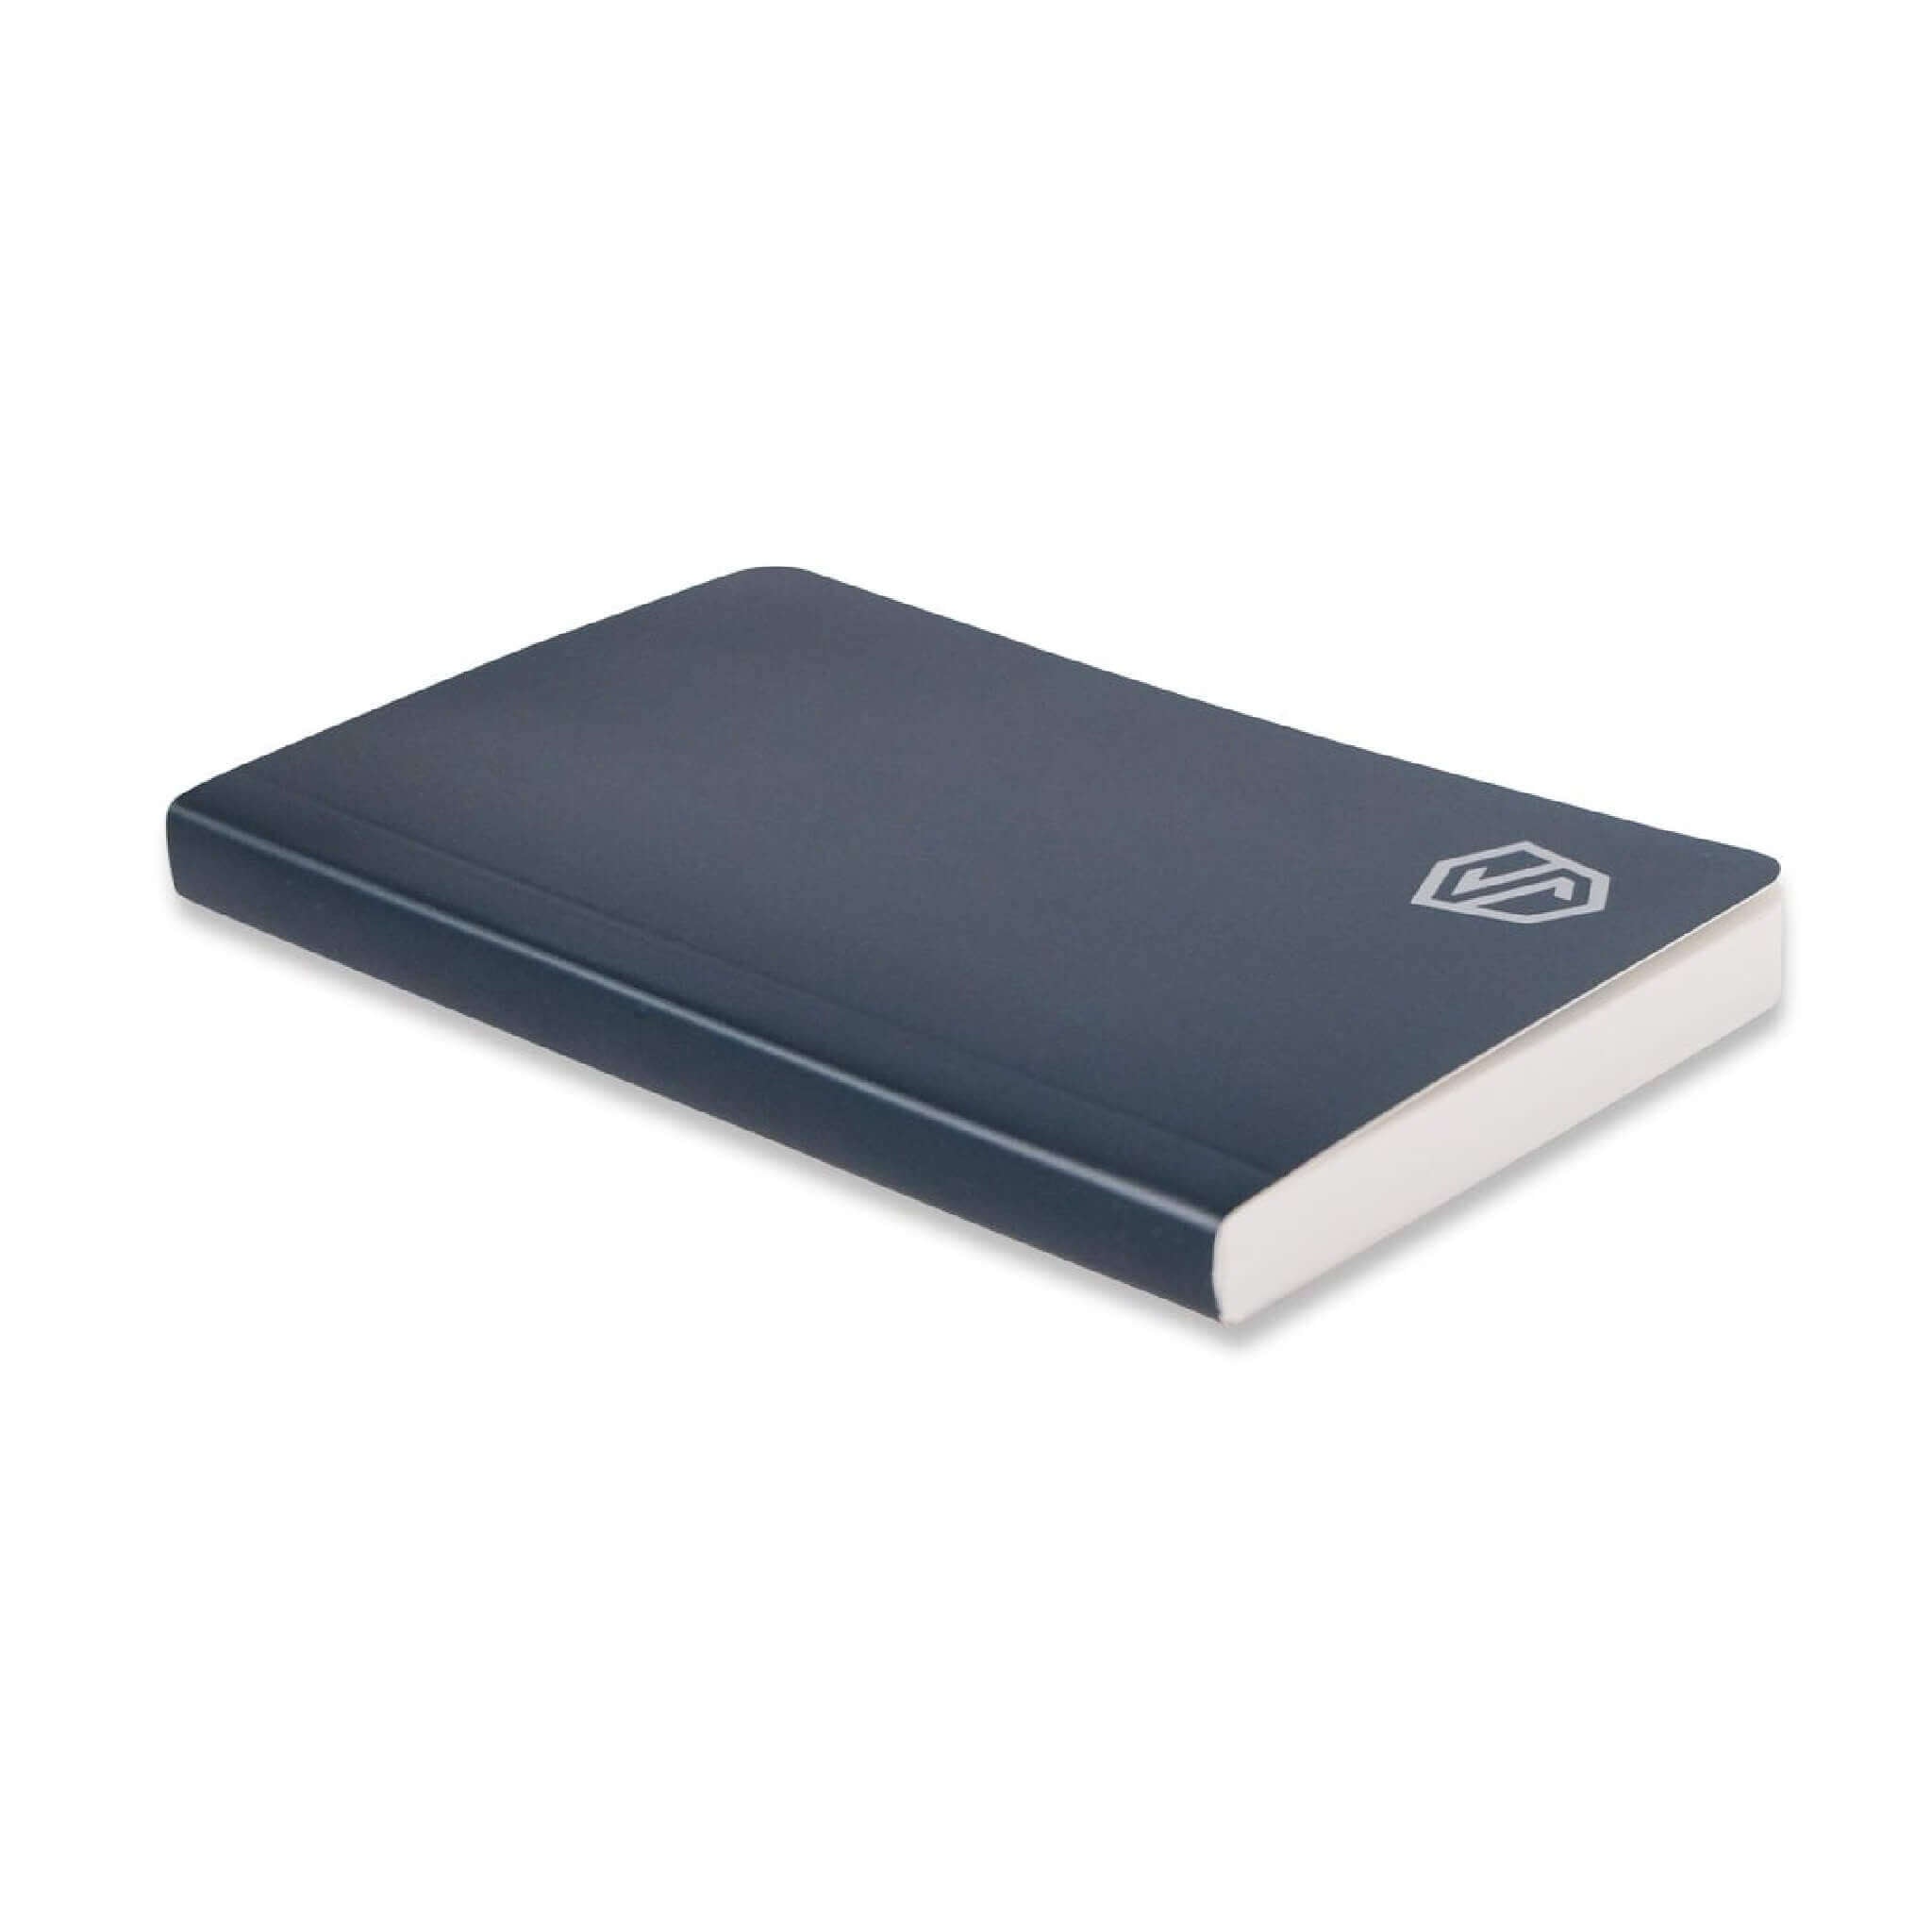 Great deal notebook for backing up seed phrases and private keys